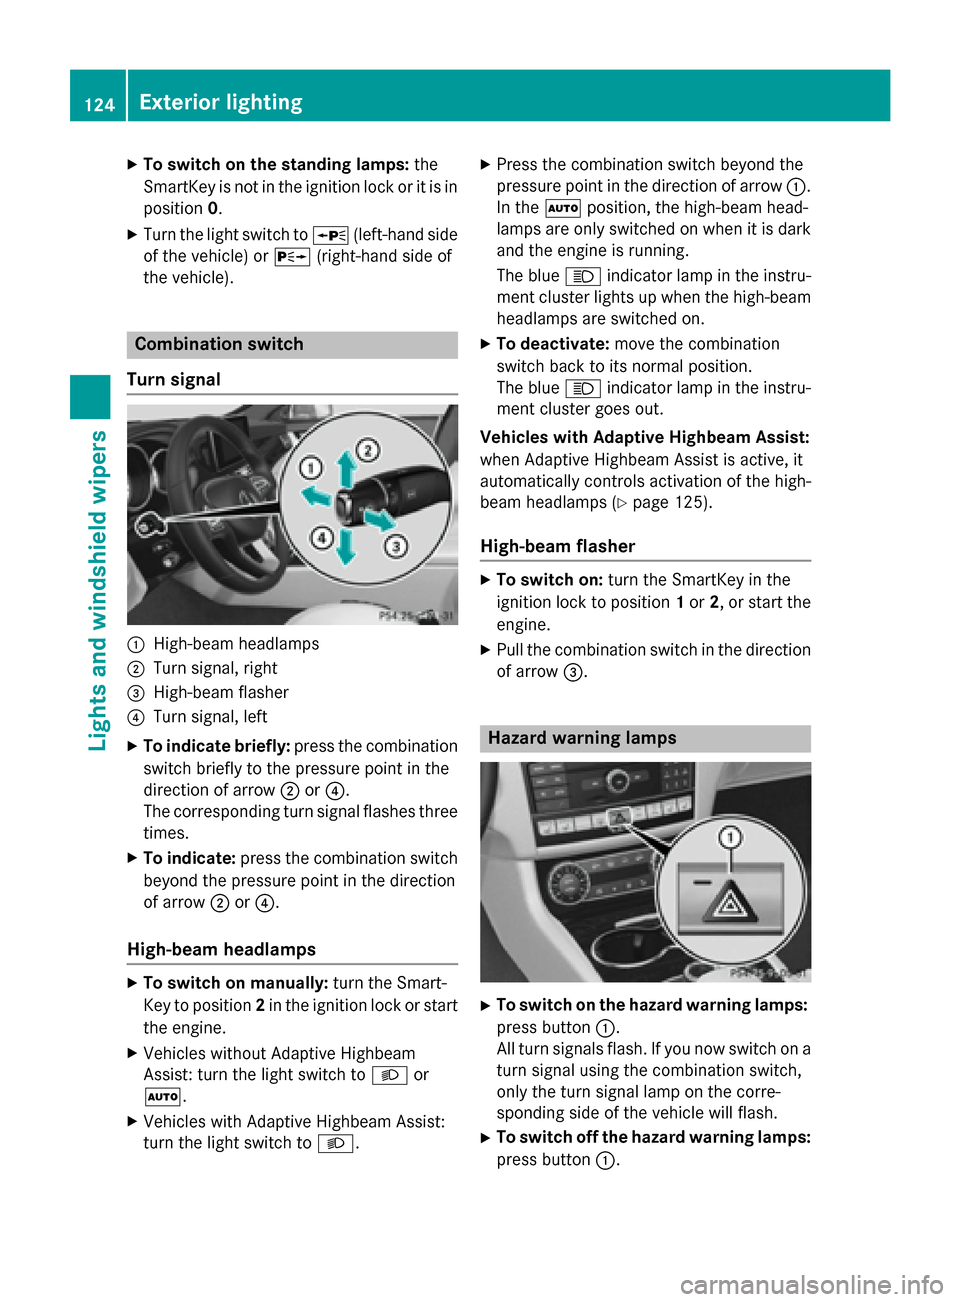 MERCEDES-BENZ CLS-Class 2015 W218 Owners Manual X
To switch on the standing lamps: the
SmartKey is not in the ignition lock or it is in position 0.
X Turn the light switch to W(left-hand side
of the vehicle) or X(right-hand side of
the vehicle). Co